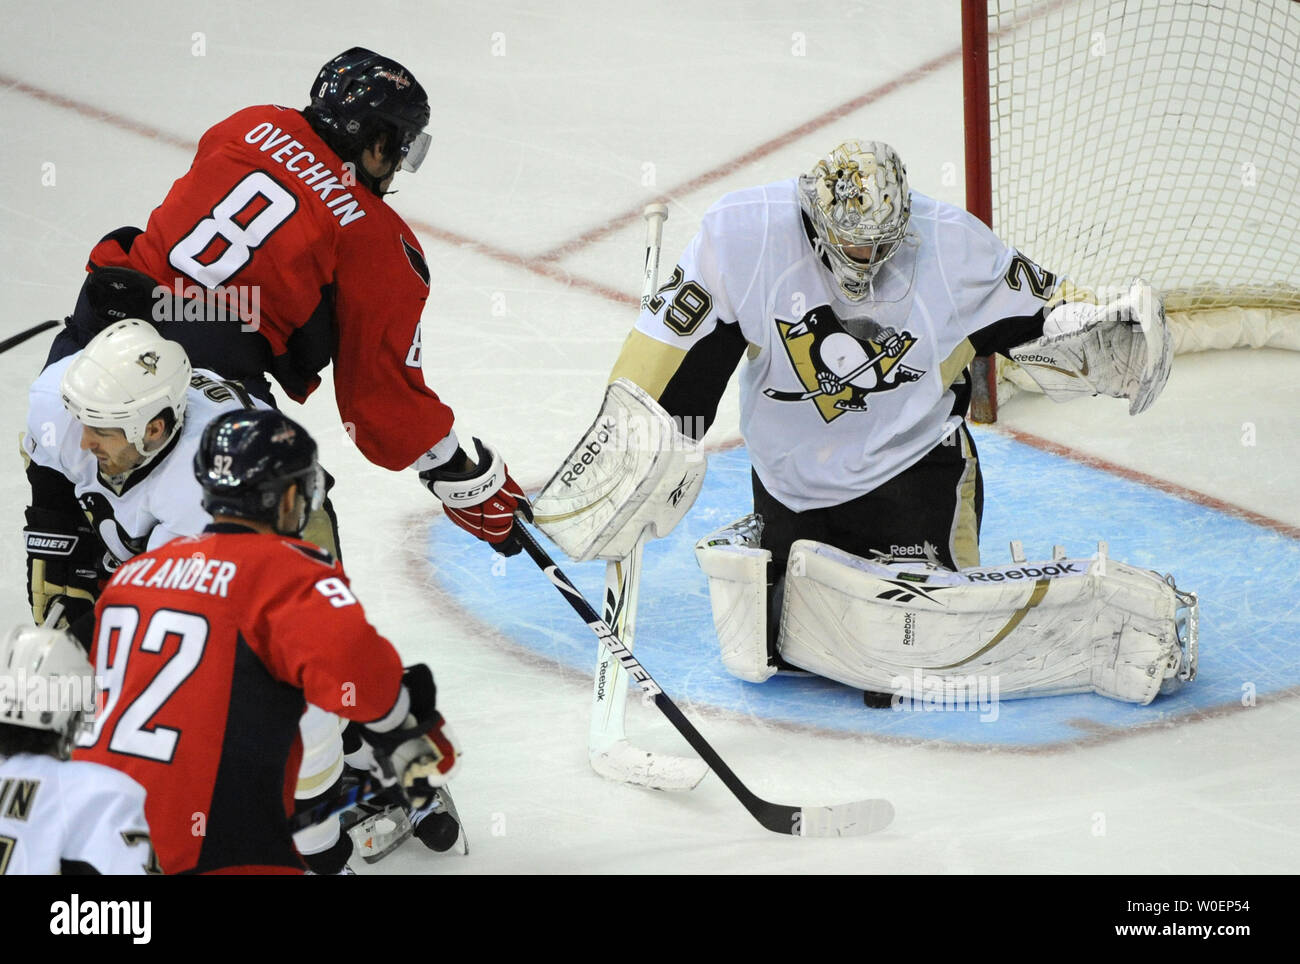 MOCK trade: how the Pens could get Marc-Andre Fleury back - PensBurgh